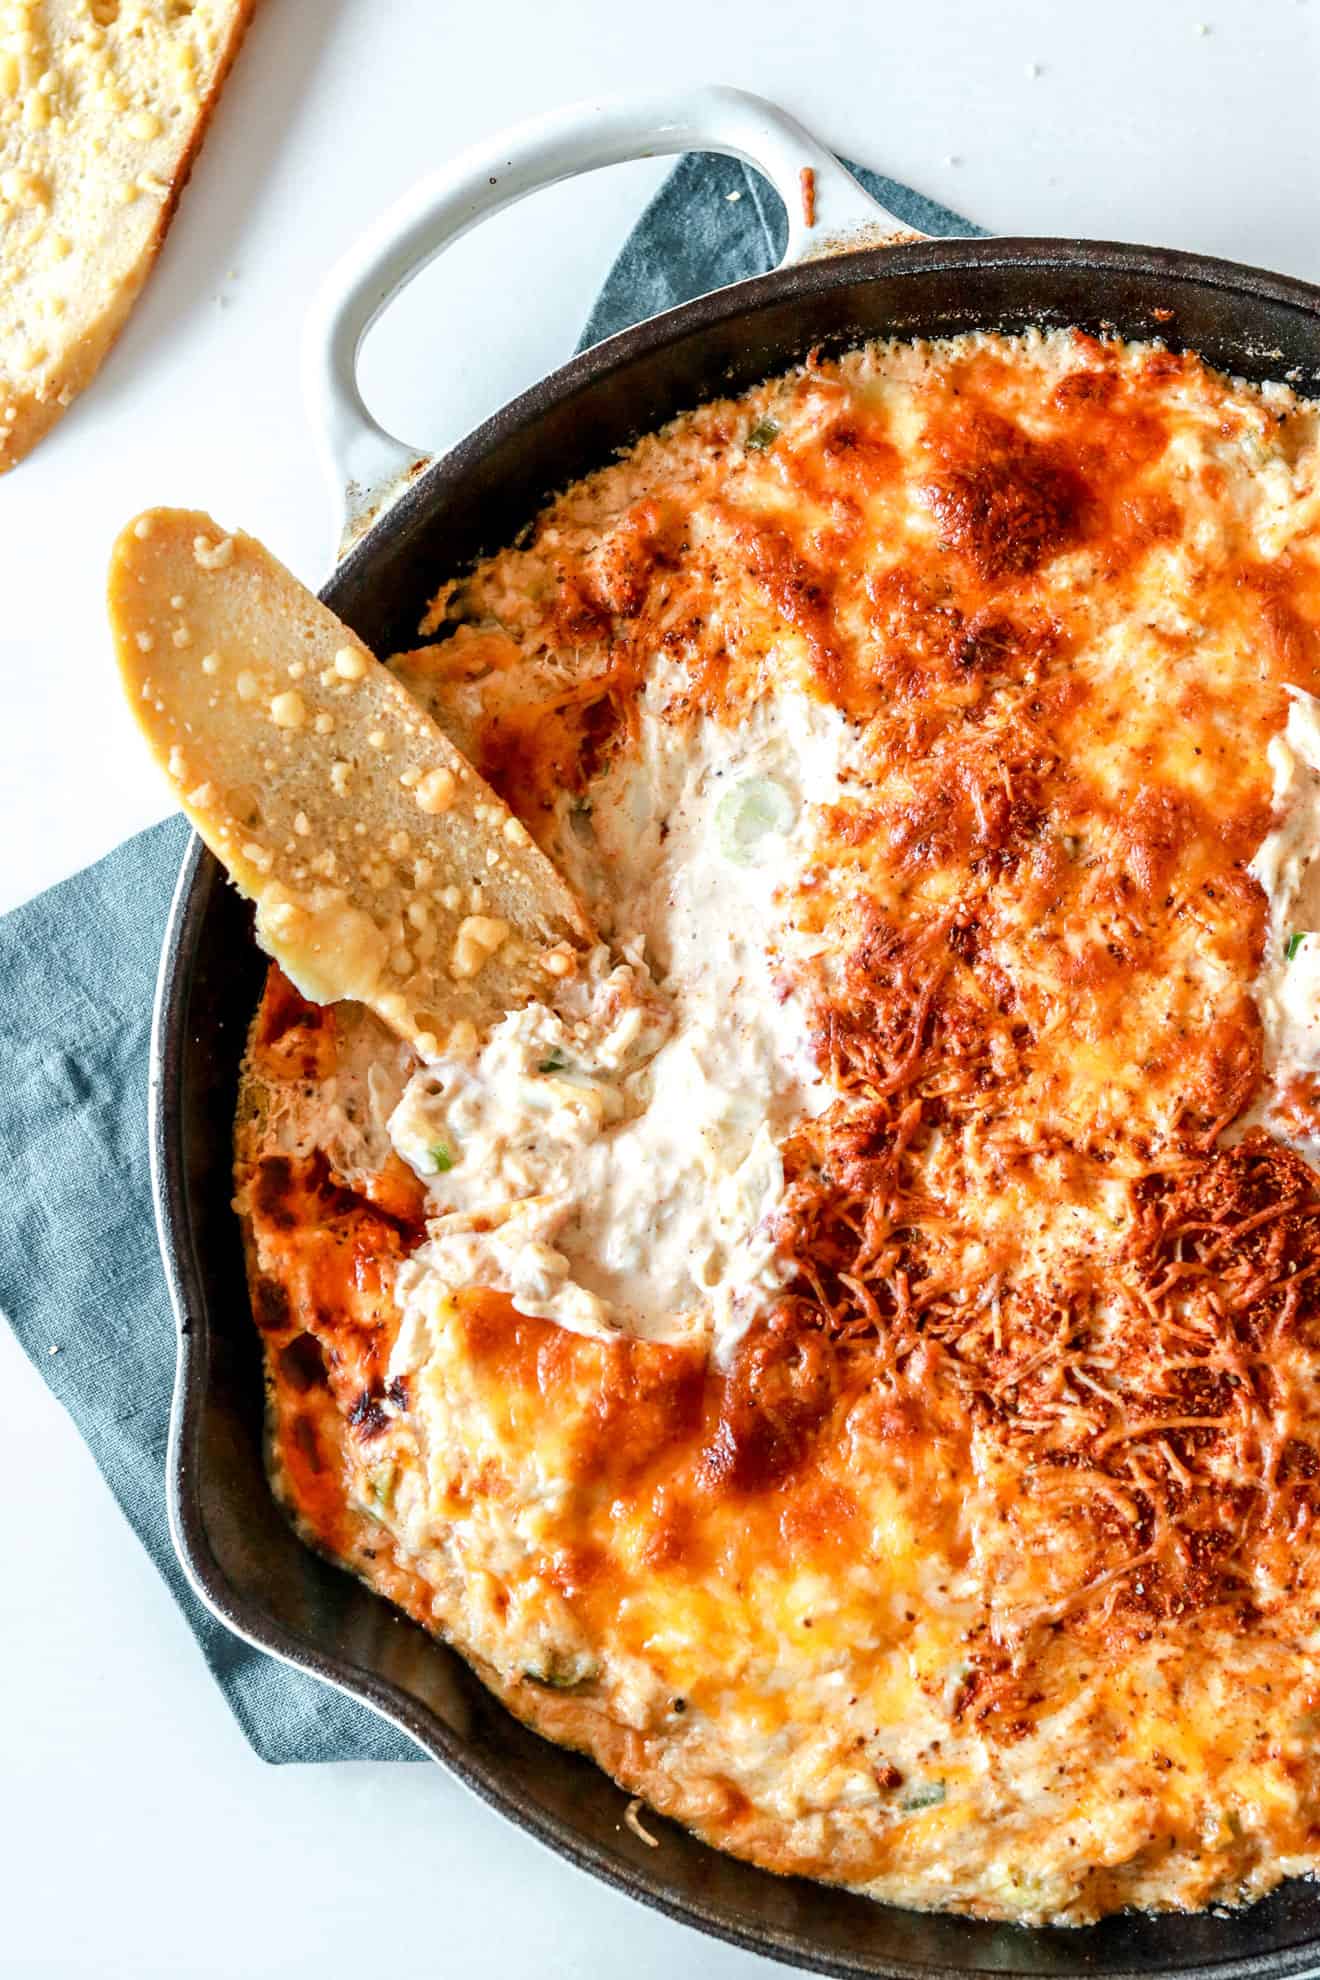 skillet filled with golden brown, hot crab dip with bread dipping into it